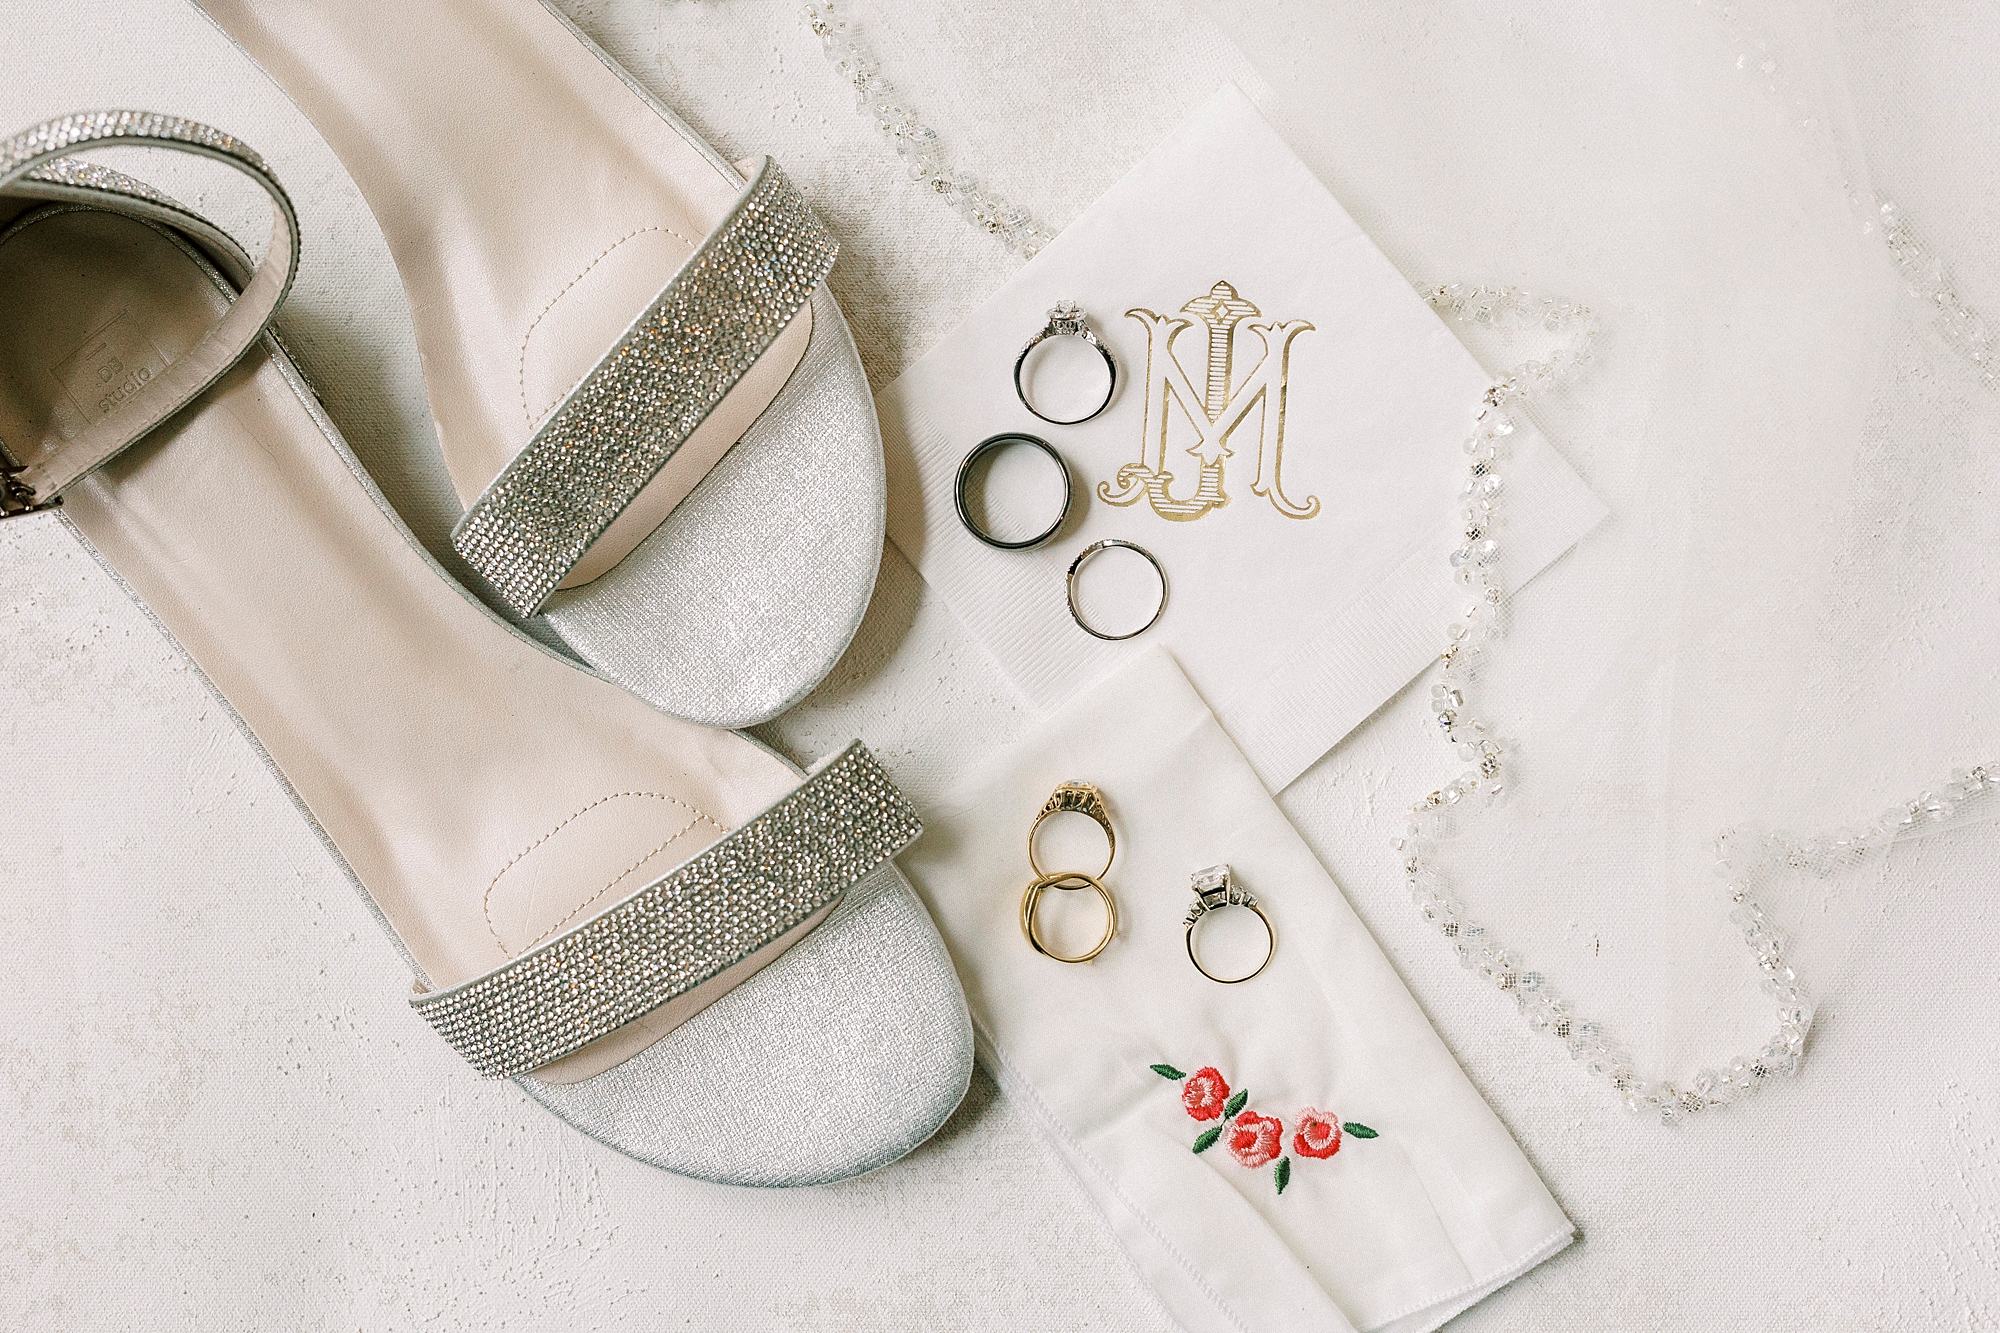 bride's silver shoes and wedding bands on handkerchief 